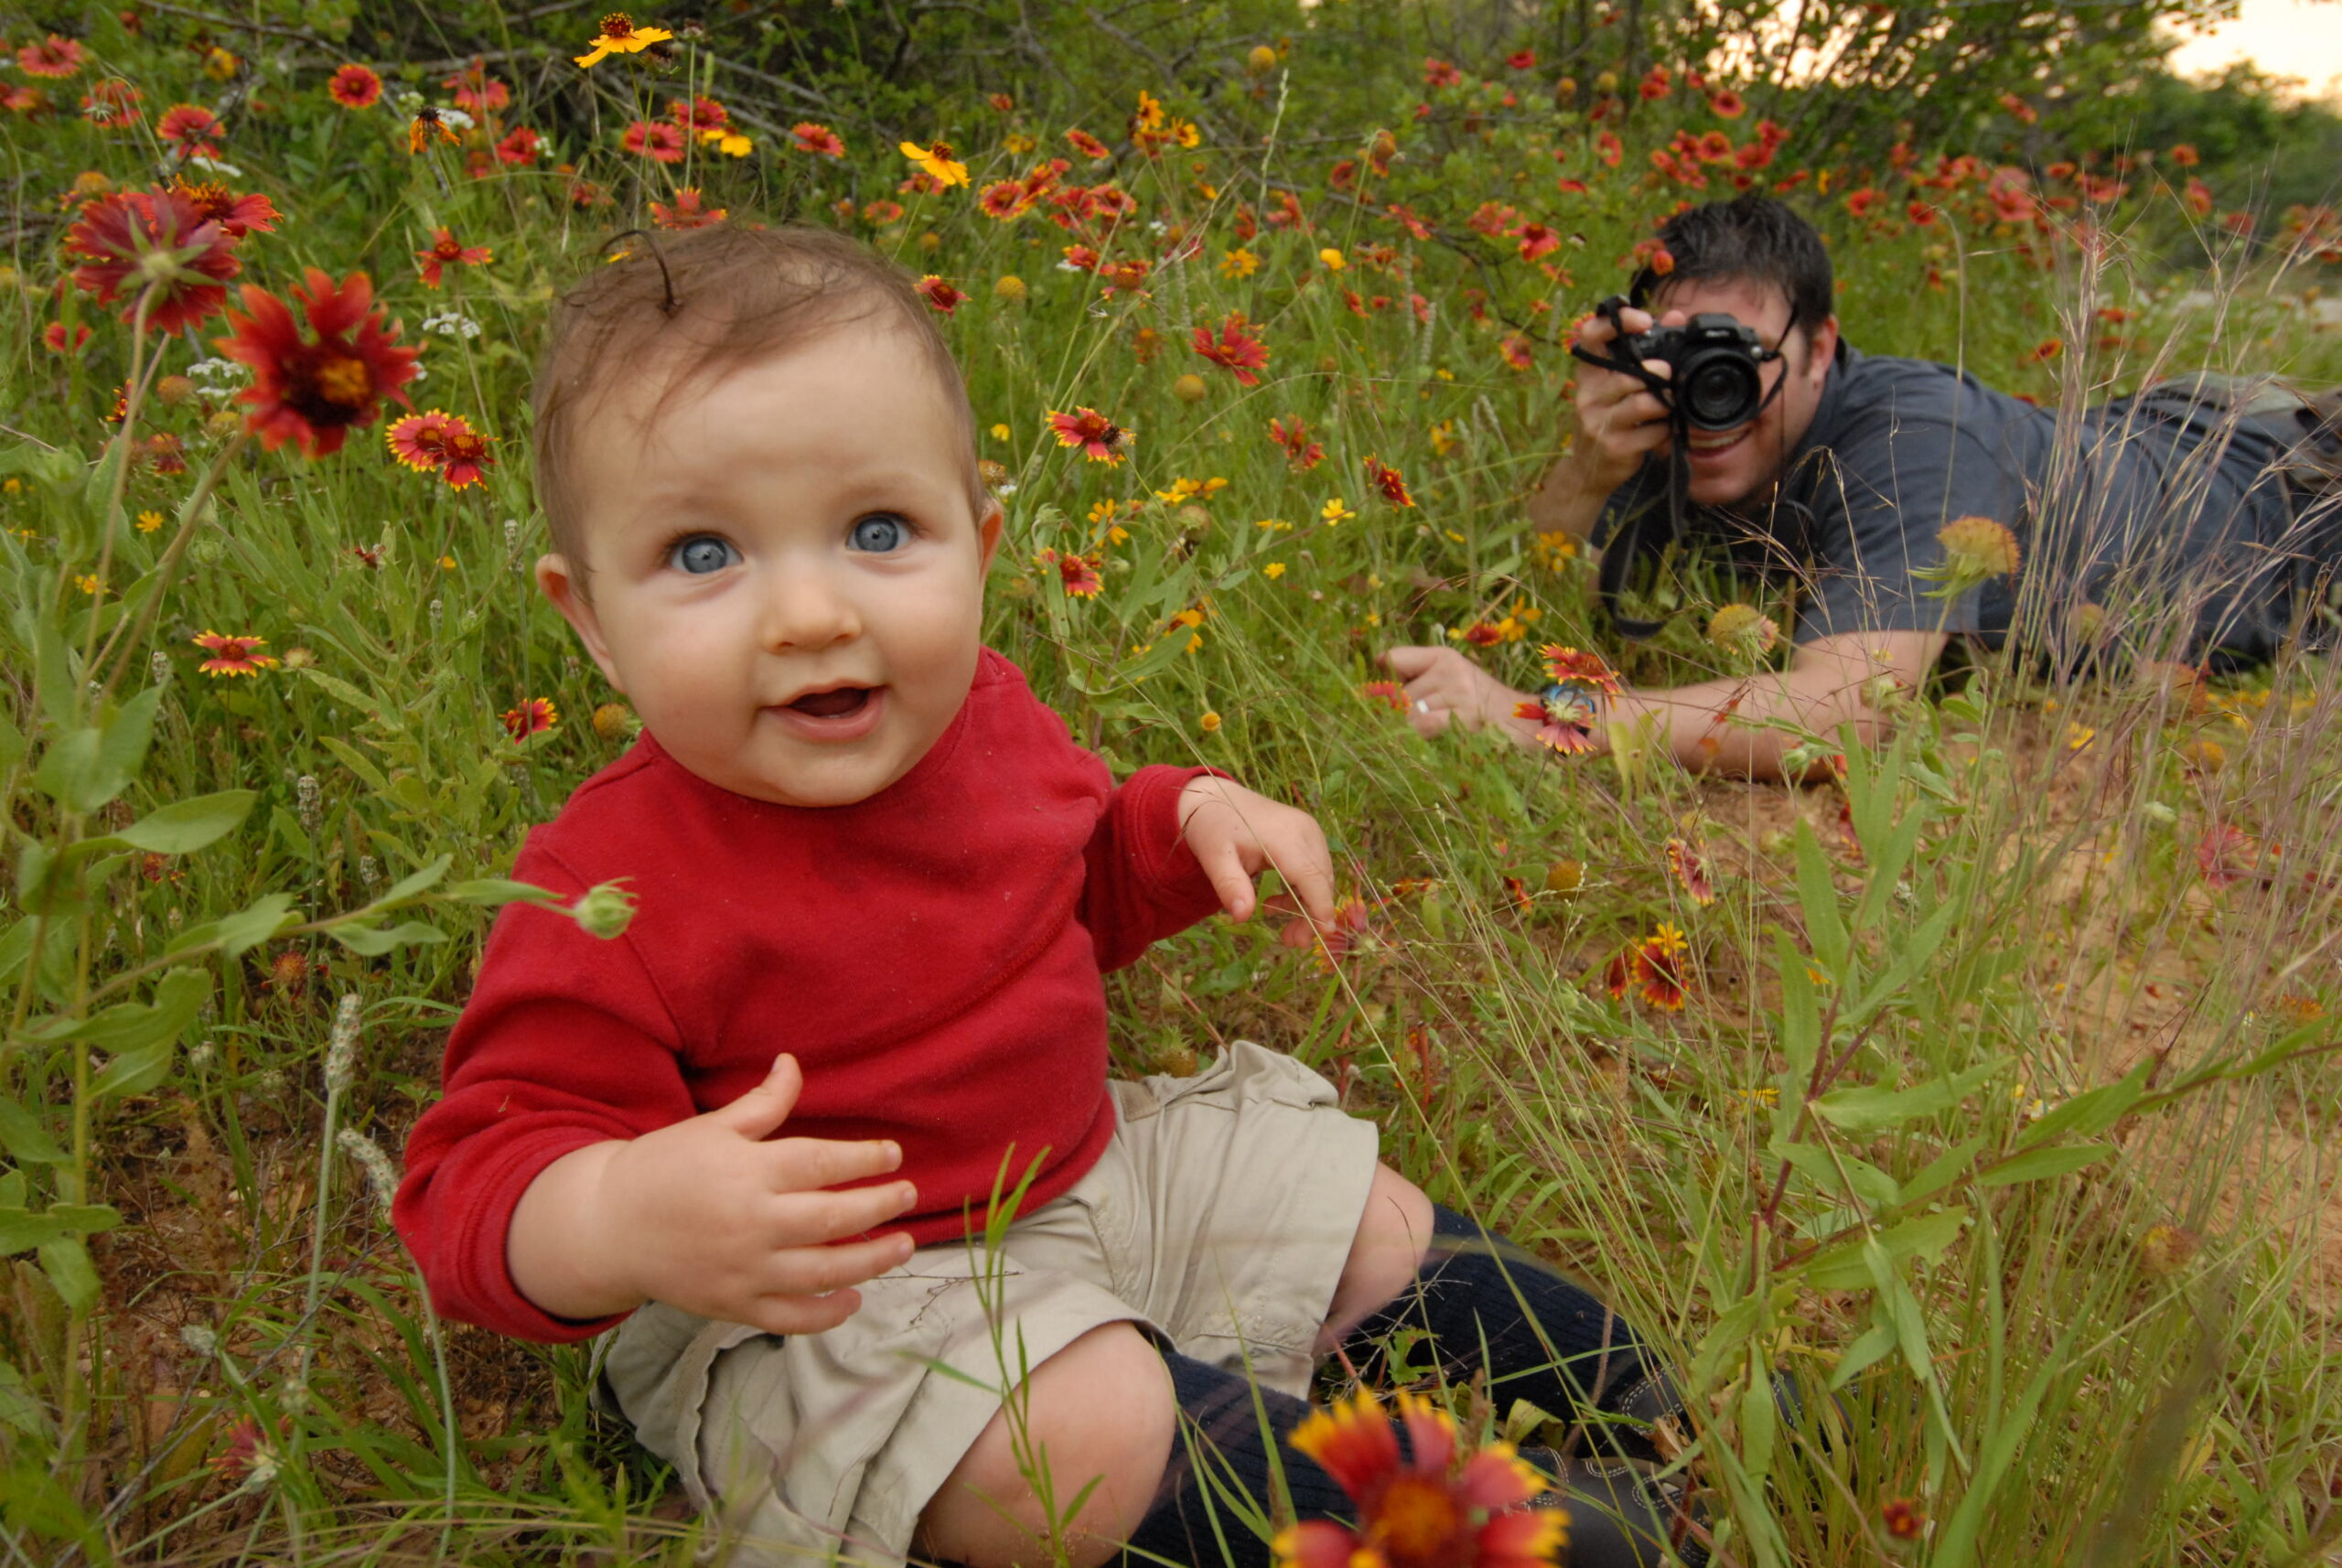 A baby in a field of flowers with a man taking pictures.